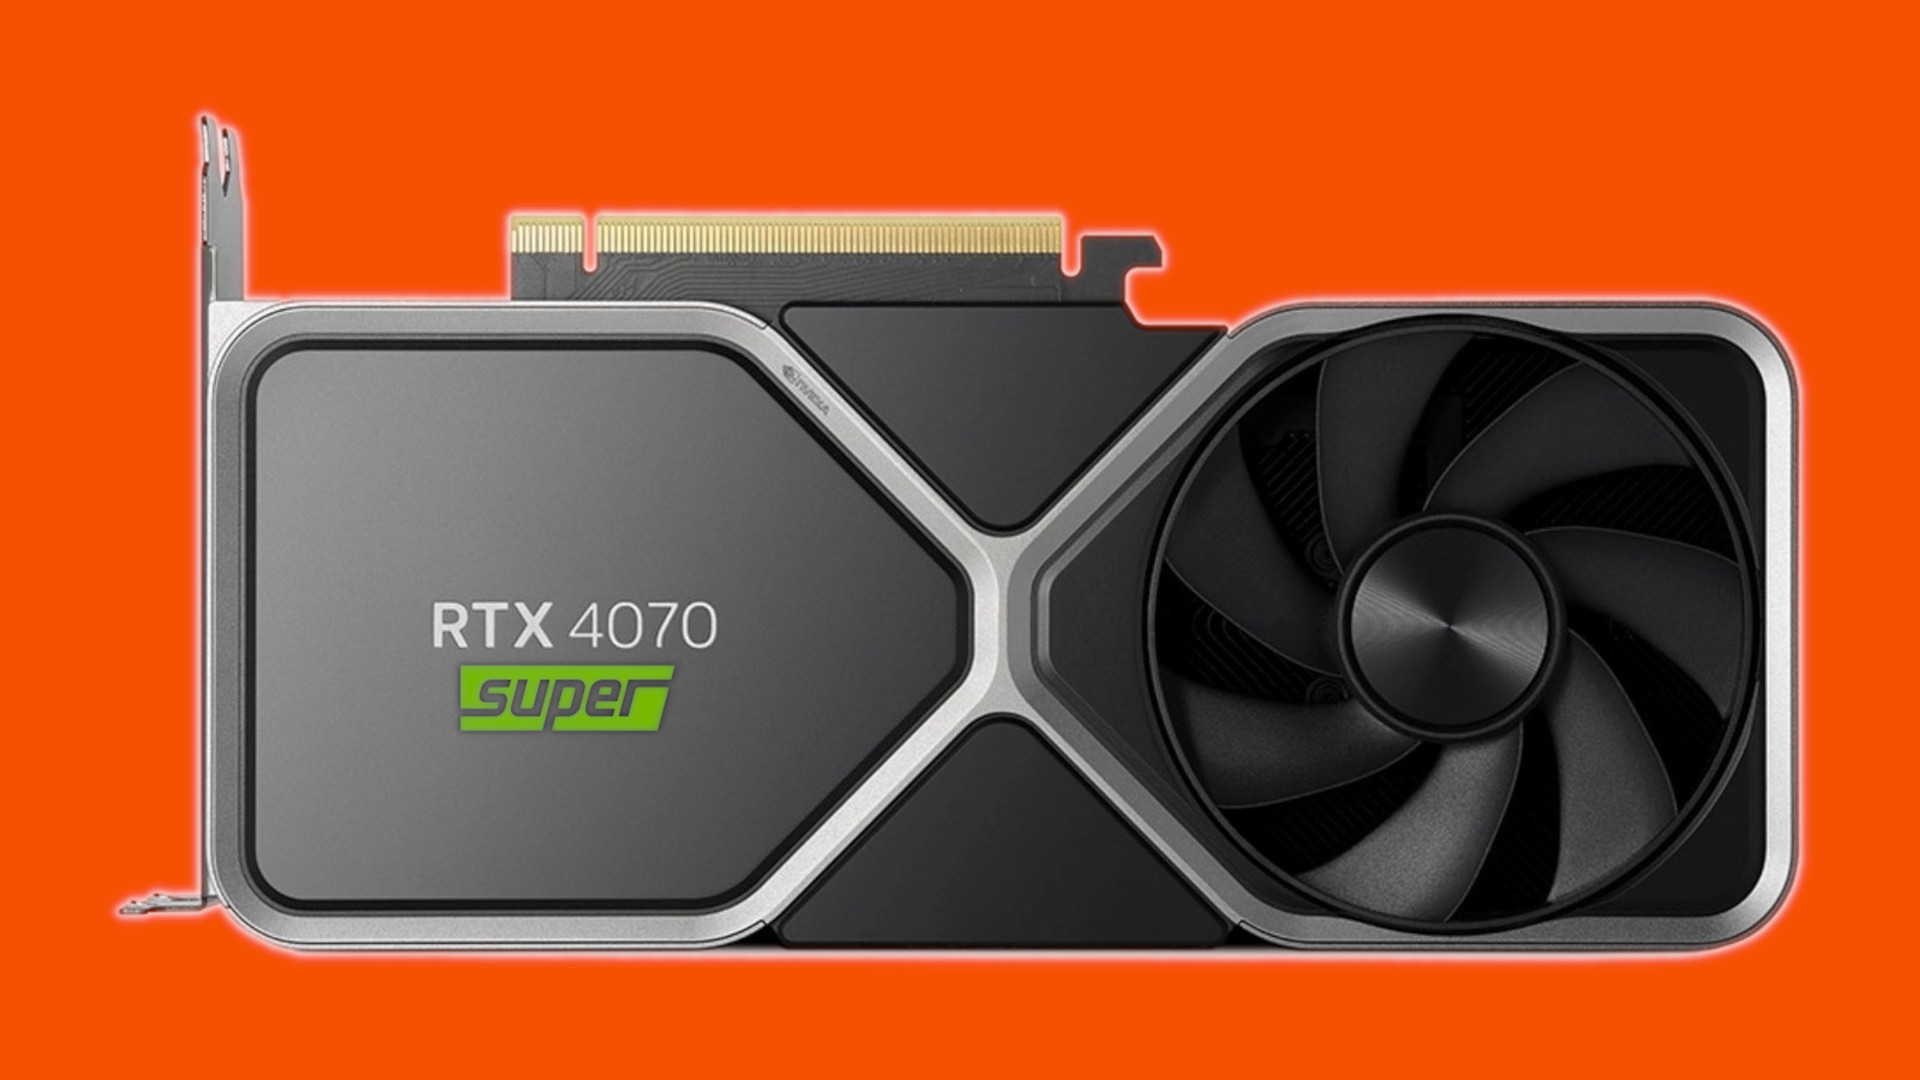 Nvidia RTX 4070 Super may be in the works, alongside two other GPUs